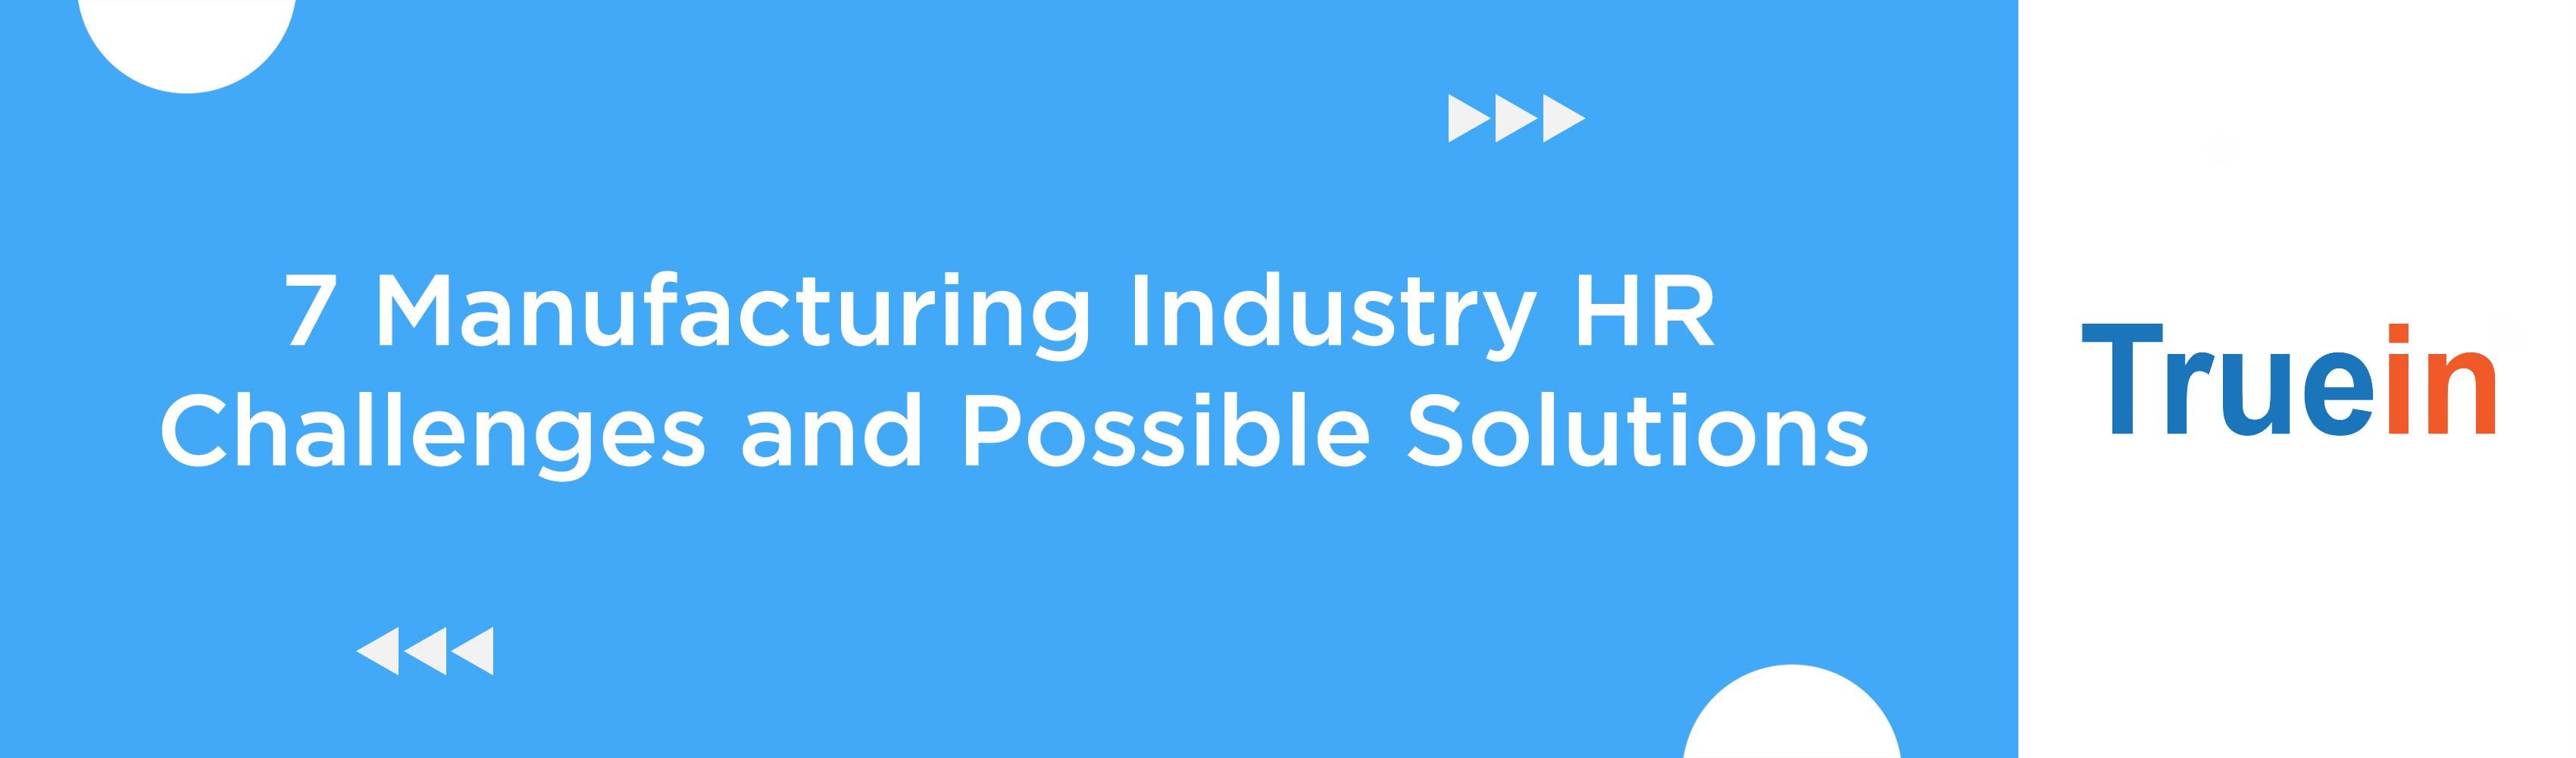 7 Manufacturing Industry HR Challenges and Possible Solutions